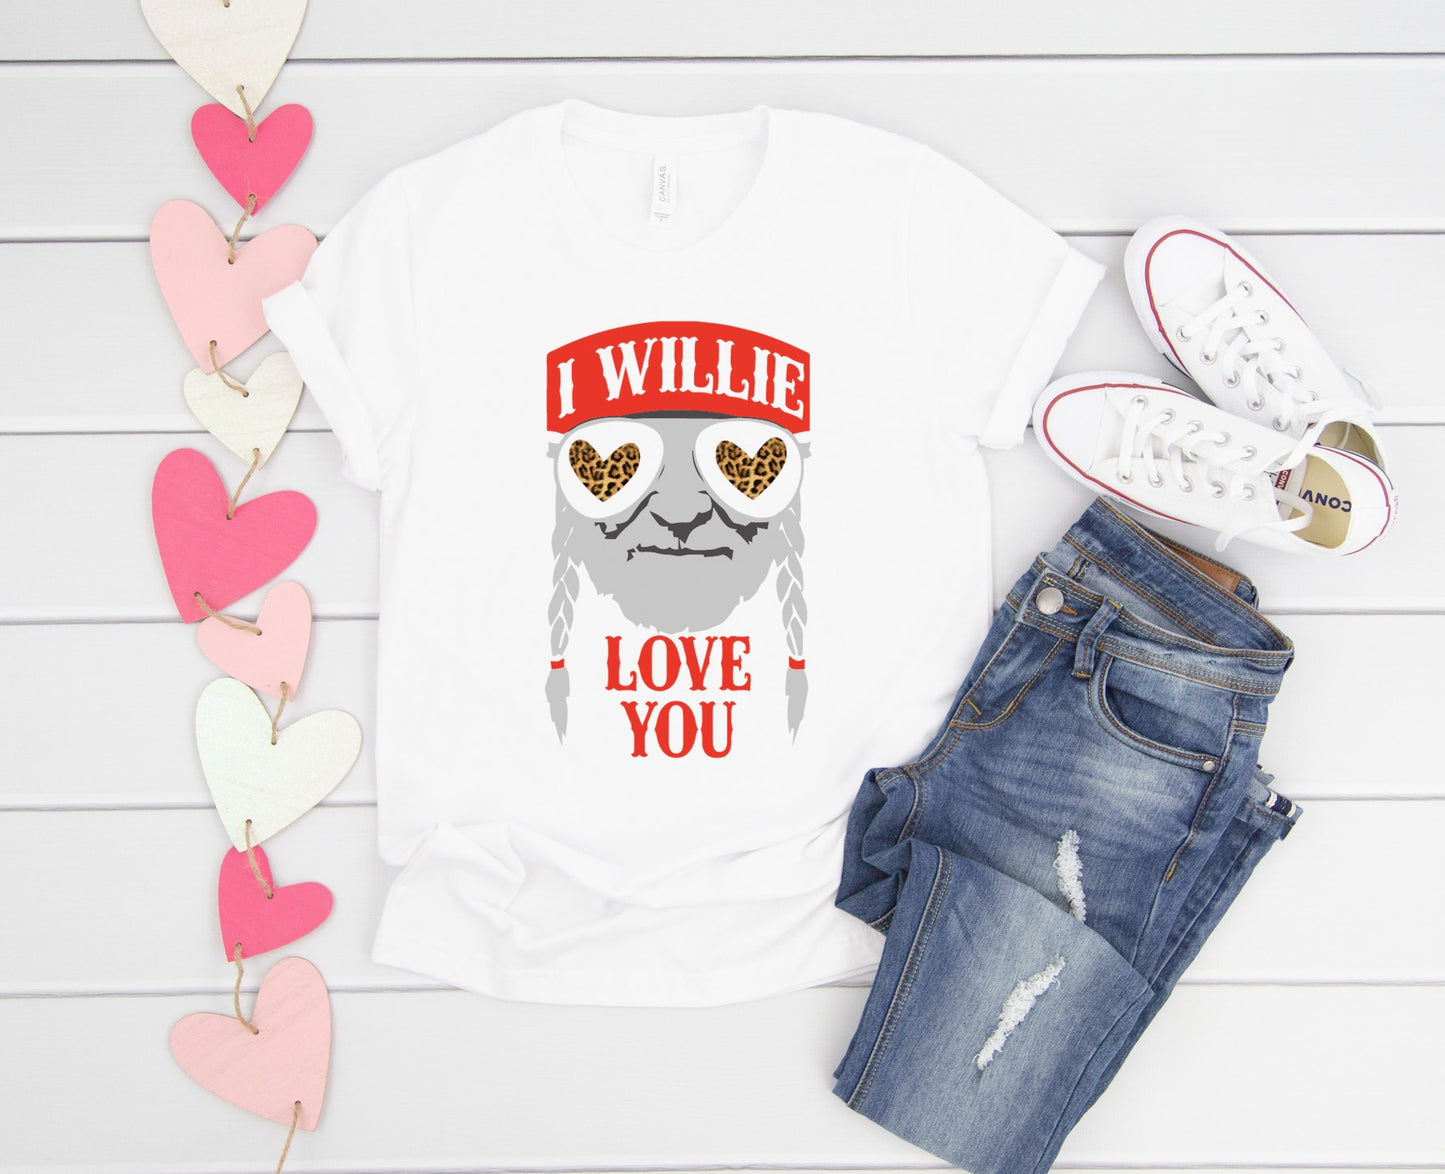 PREORDER - I Willie Love You Leopard Hearts Boutique Soft Tee